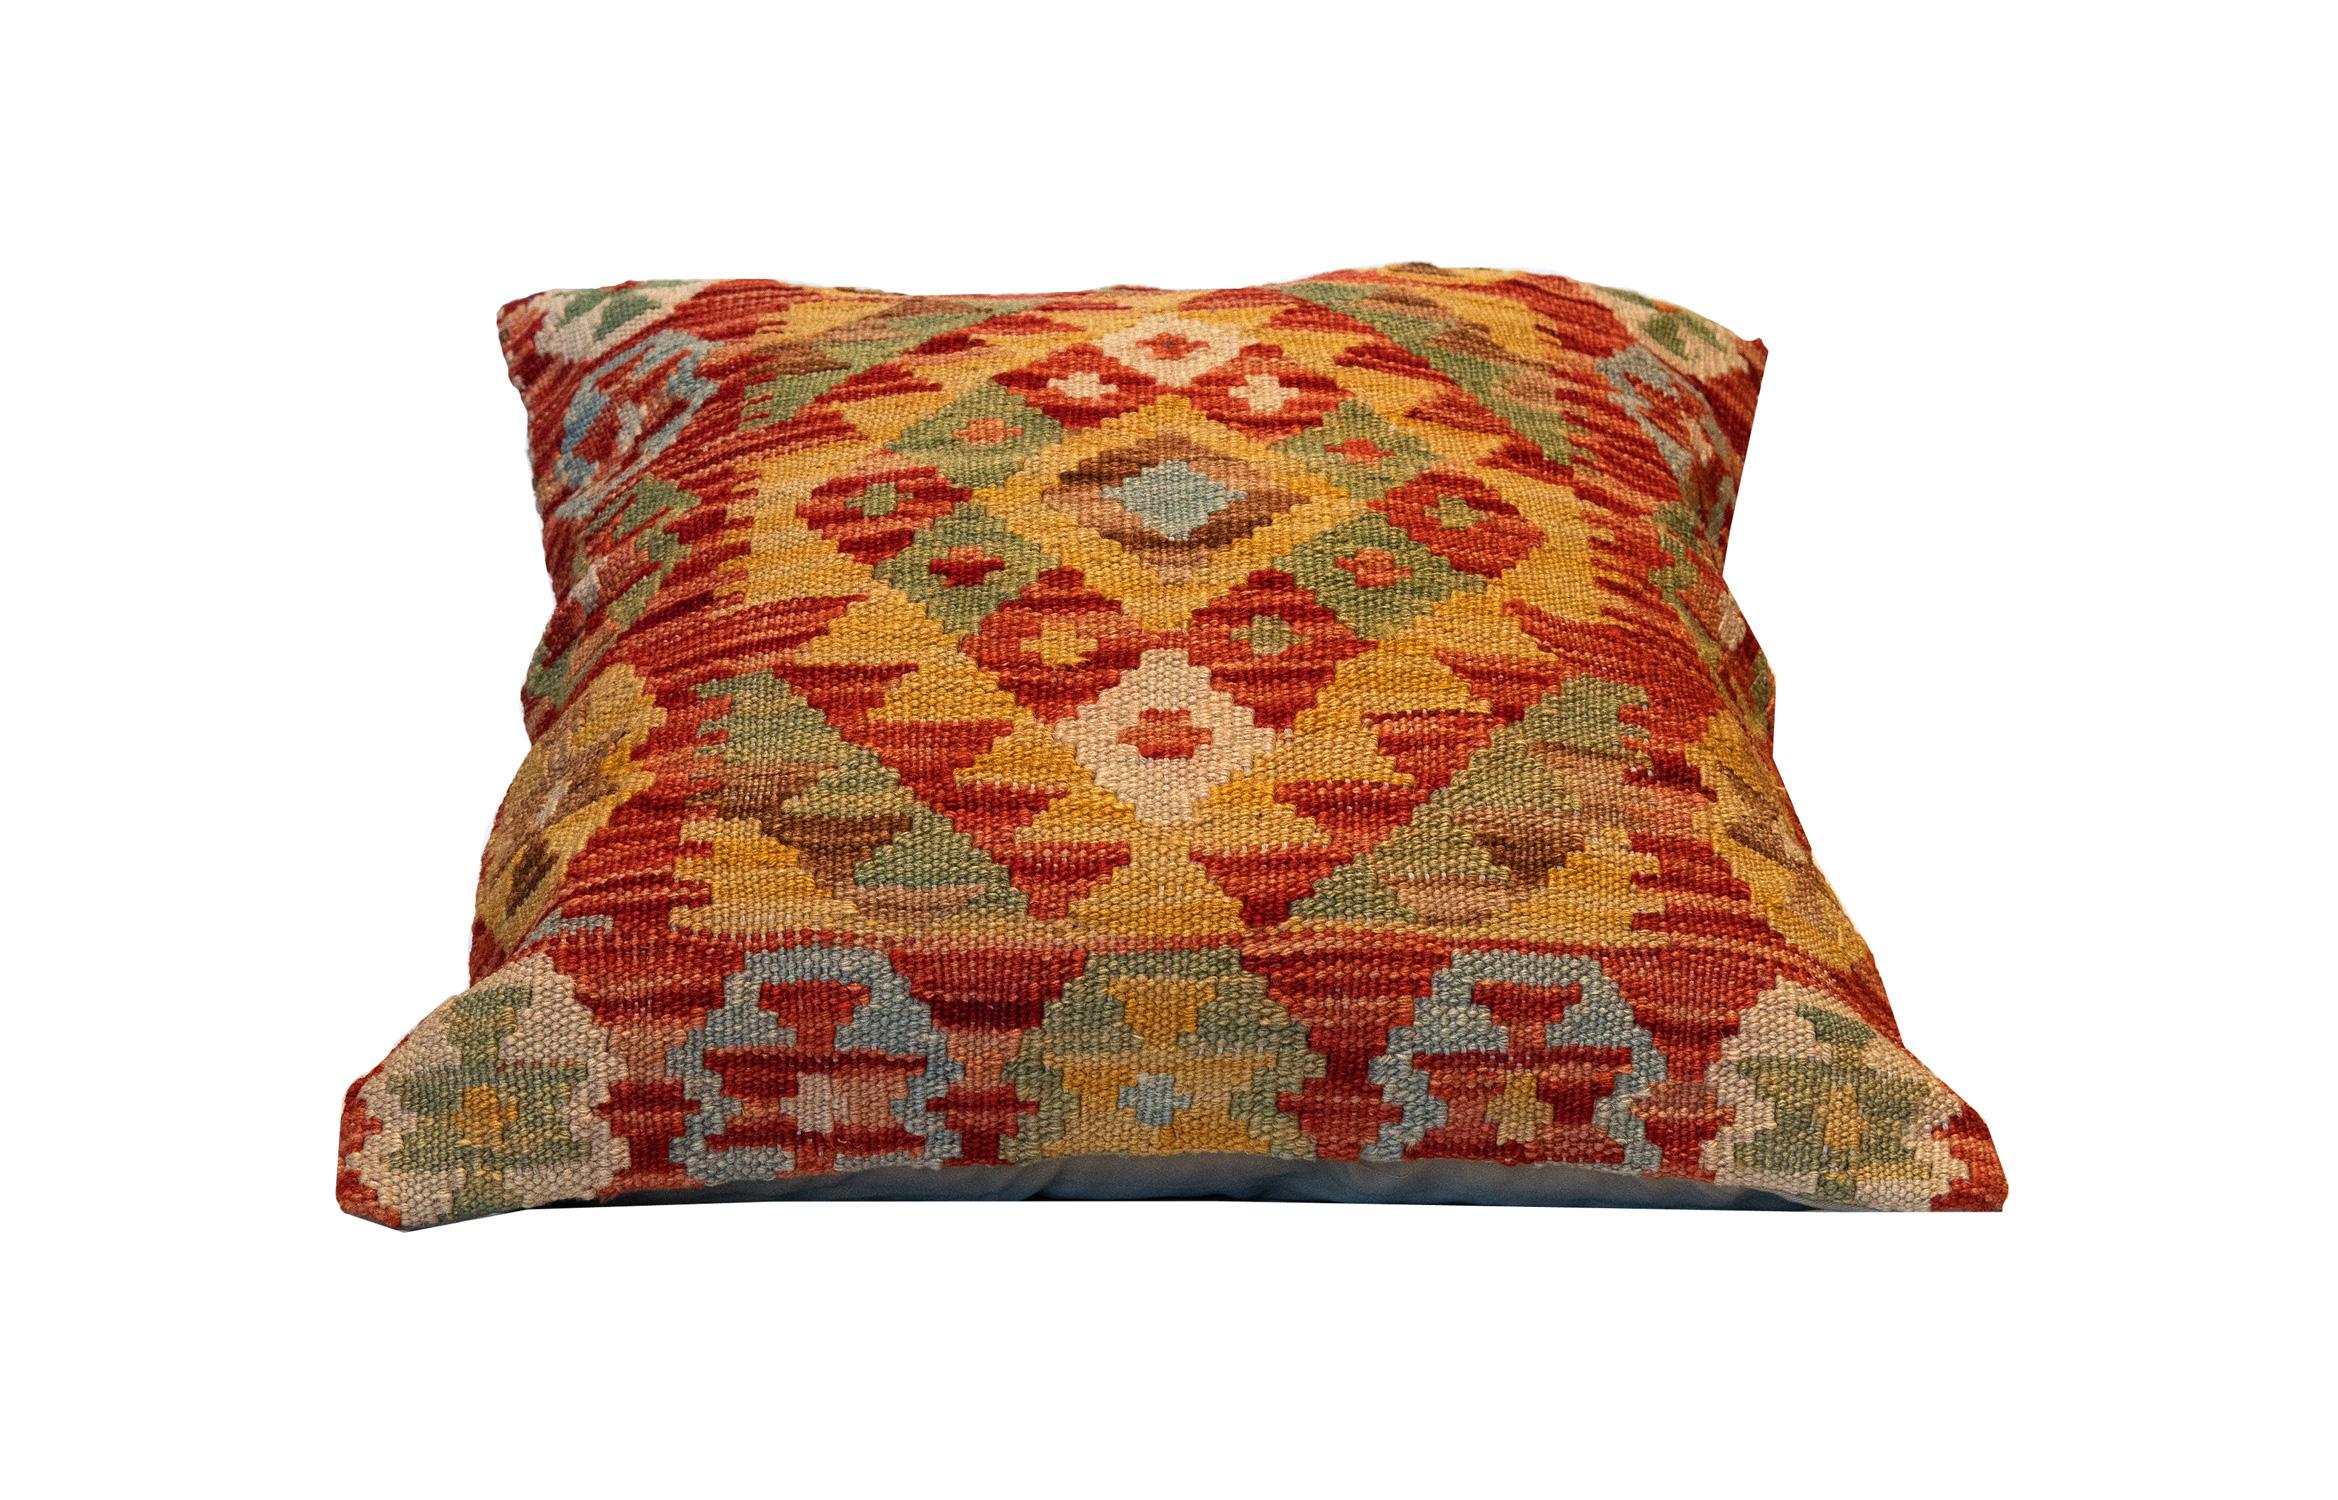 This truly unique geometric cushion cover is a handwoven kilim cushion cover woven in Afghanistan in the late 20th century/ early 21st century. Featuring a bold colour palette and geometric design made up of orange, brown, beige and green accents.